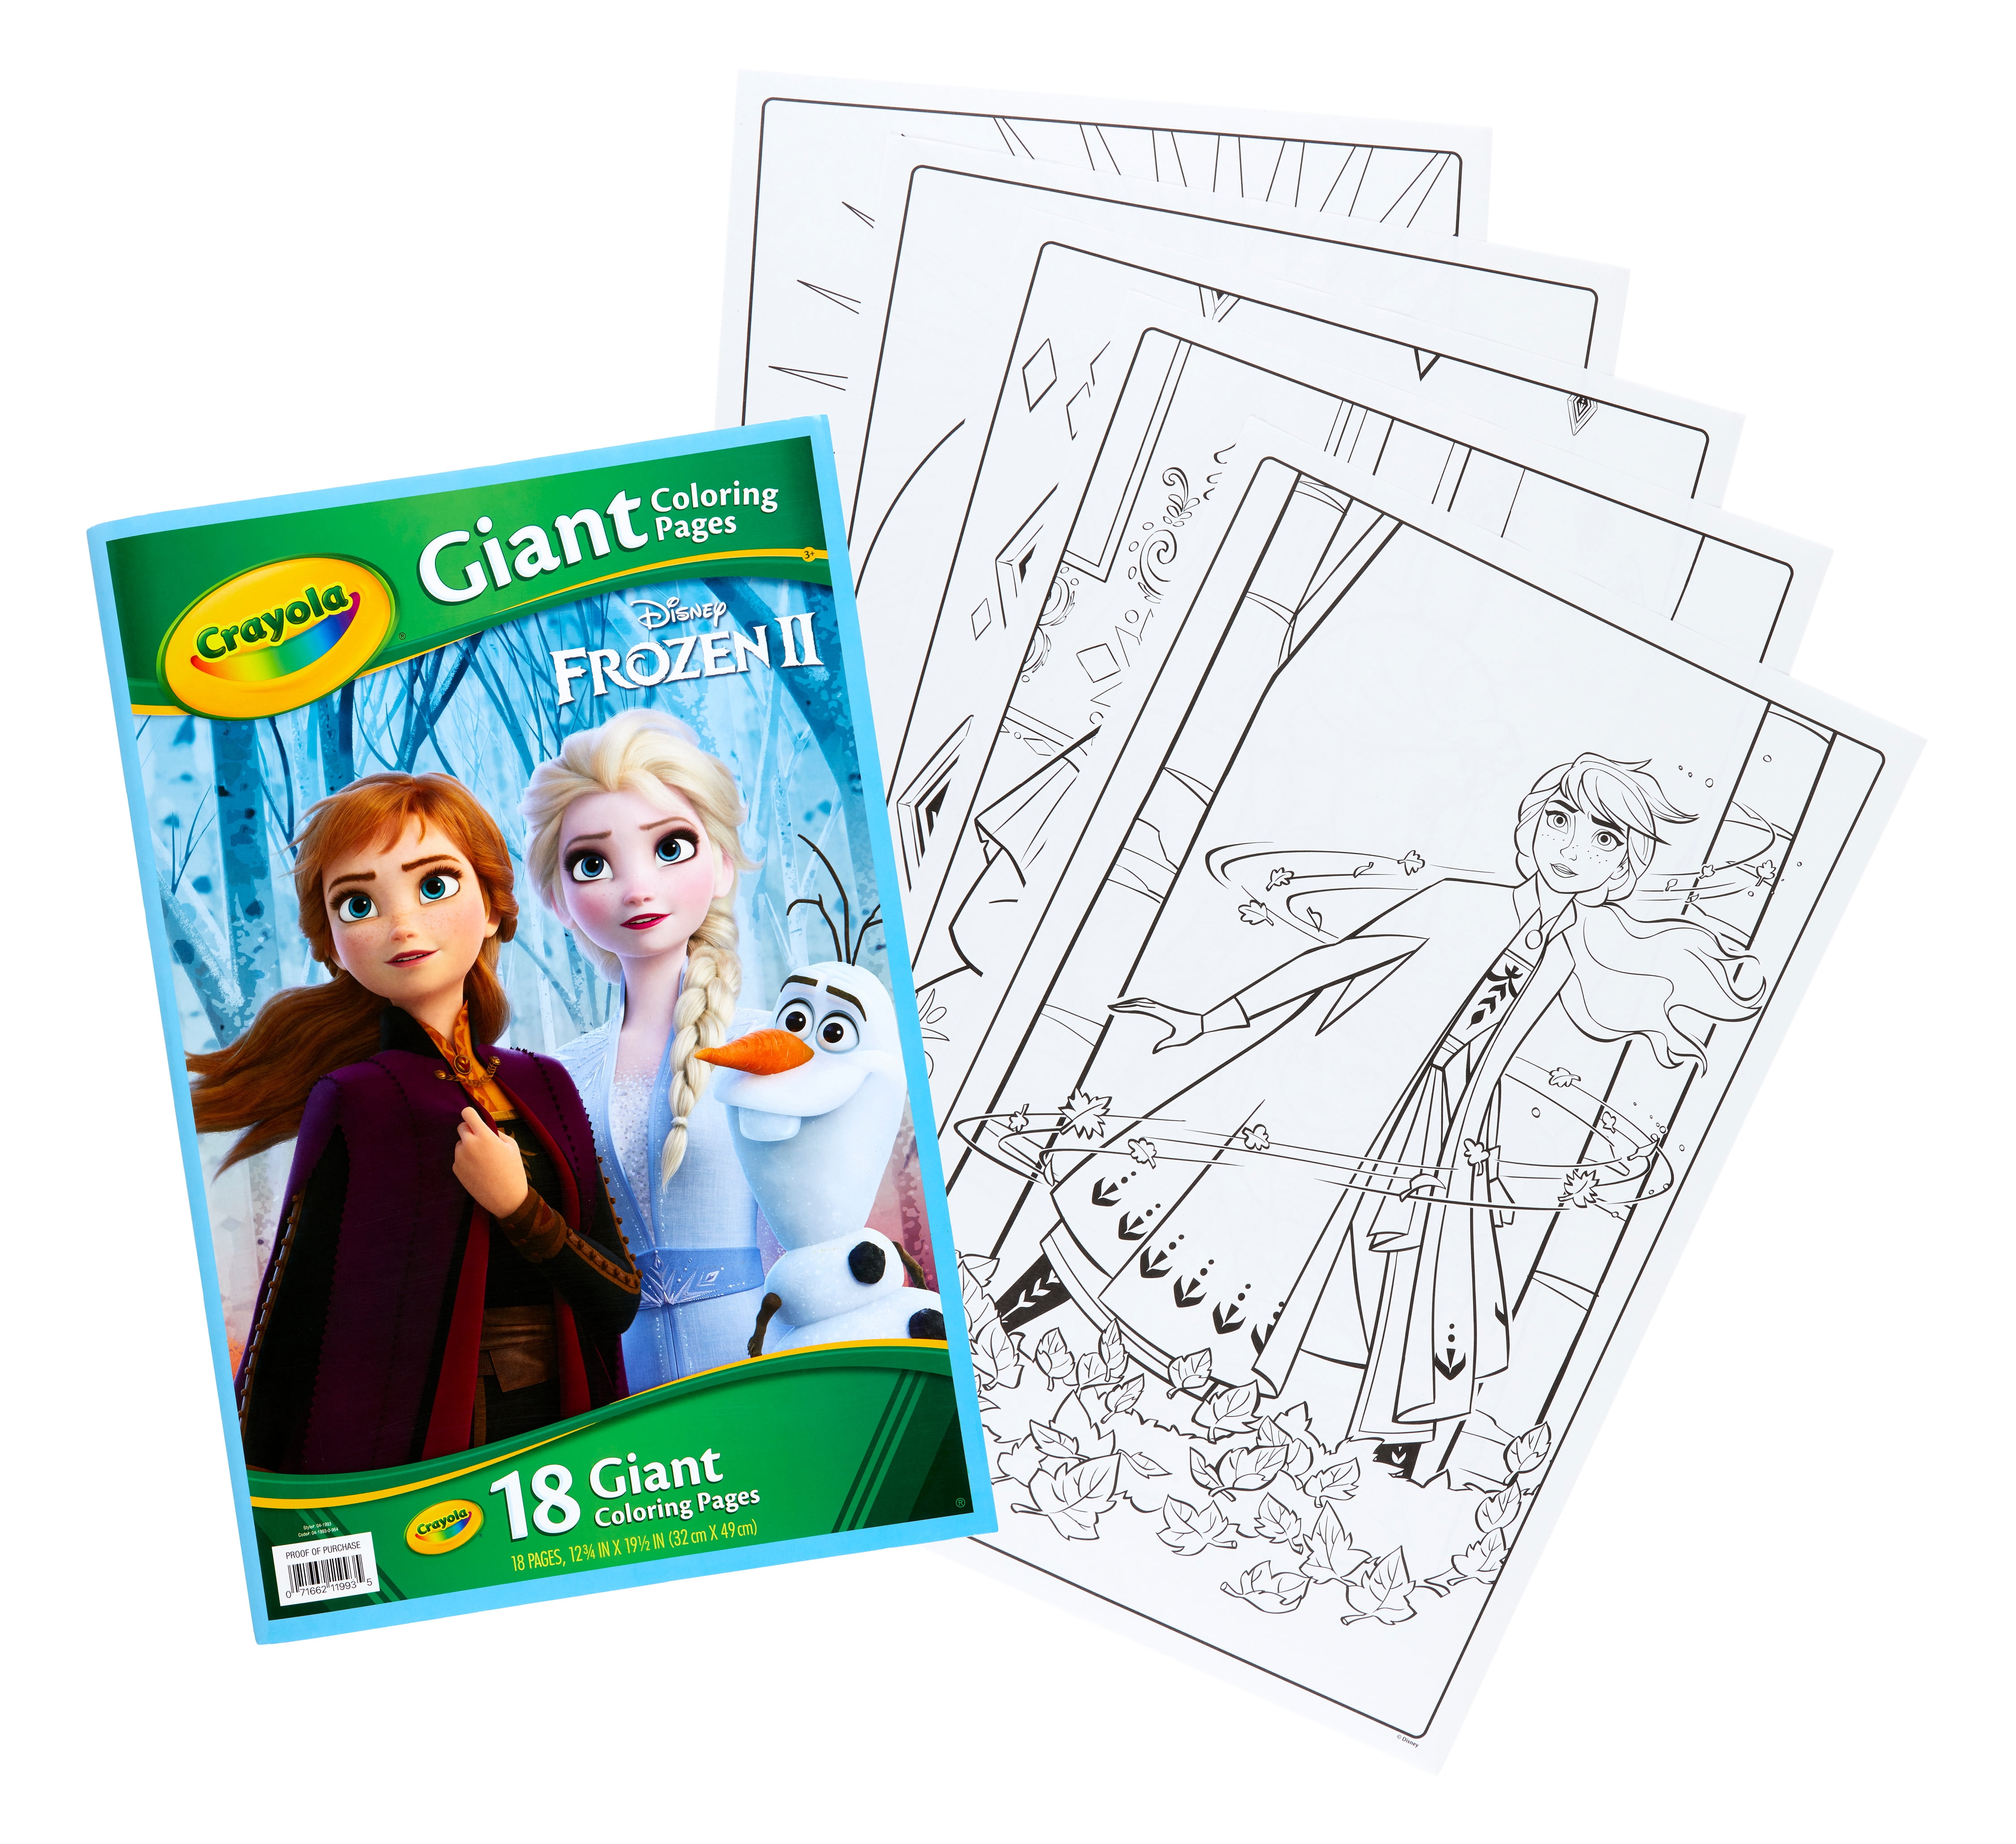 Crayola Giant Coloring Pages Featuring Disney's Frozen, 18 Pages